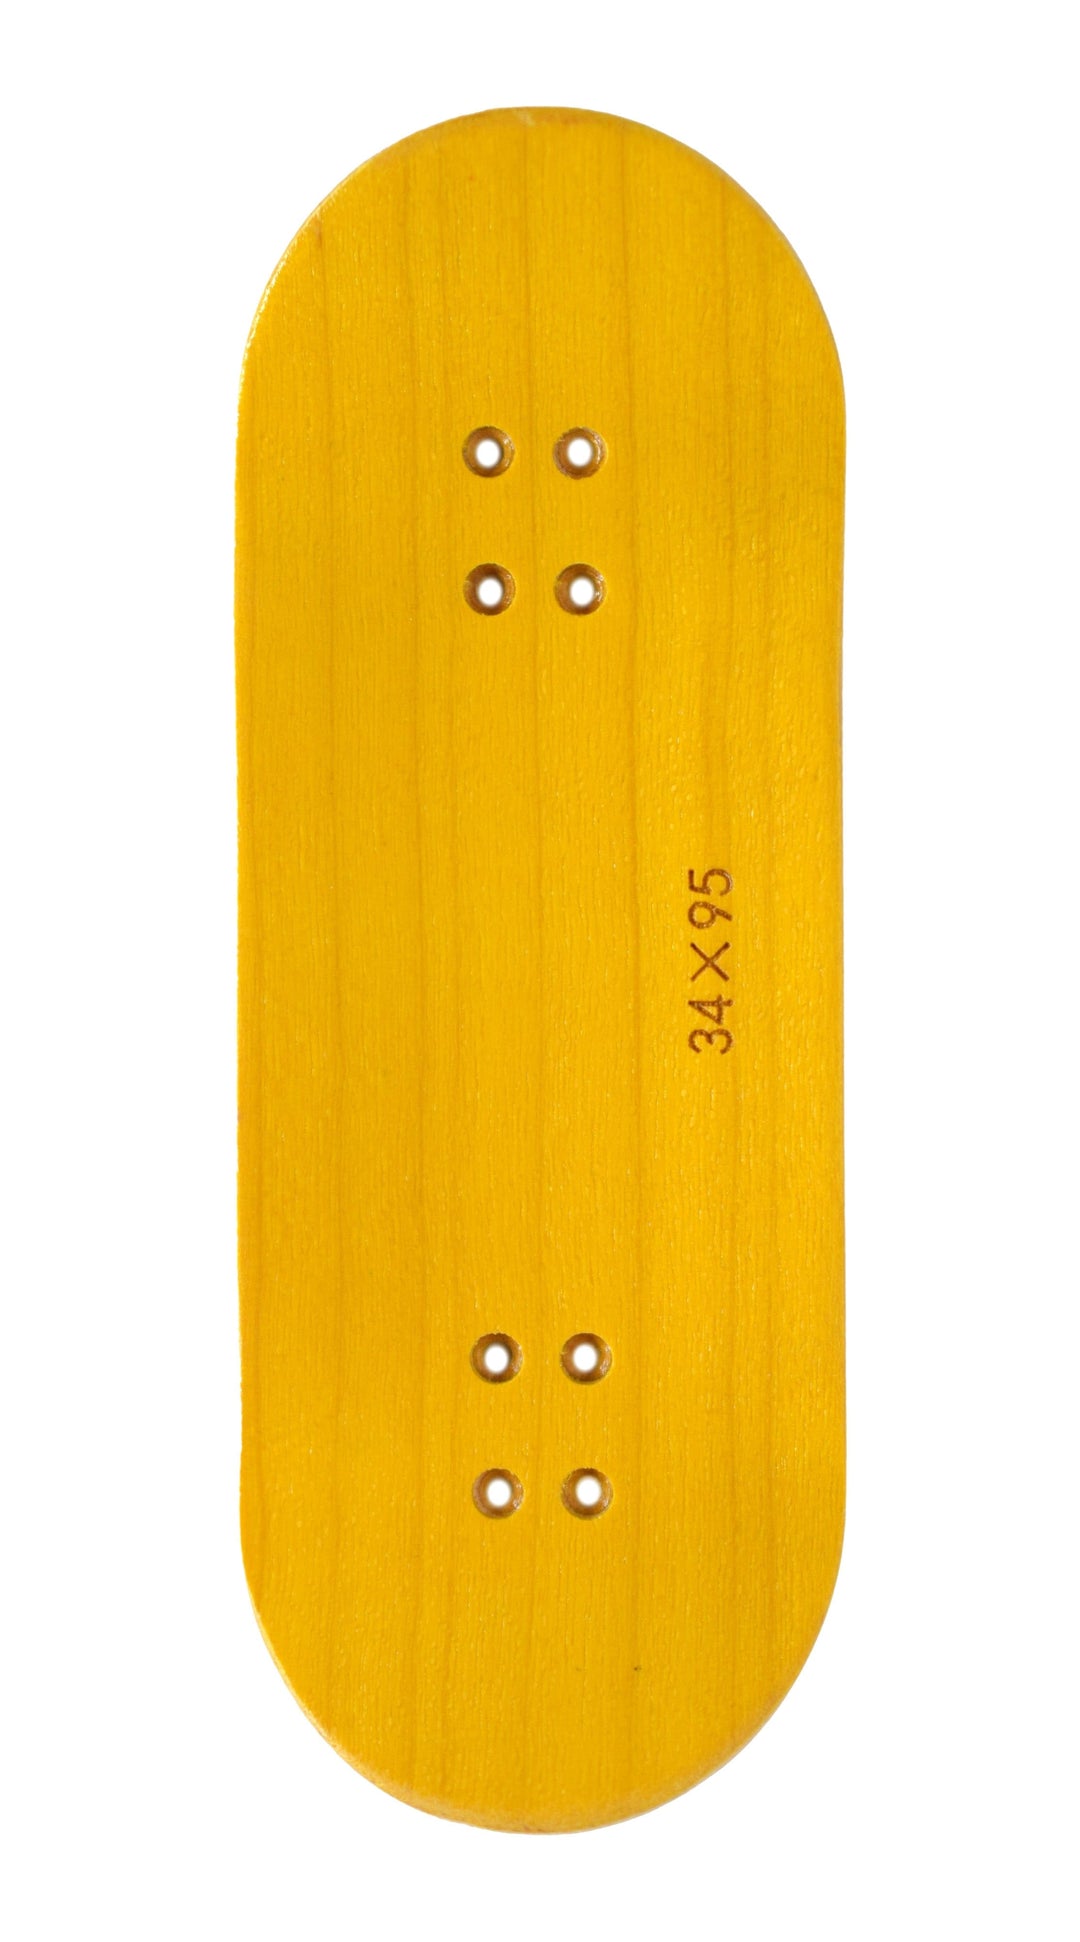 Teak Tuning PROlific Wooden 5 Ply Fingerboard Deck 34x95mm - Banana Yellow - with Color Matching Mid Ply